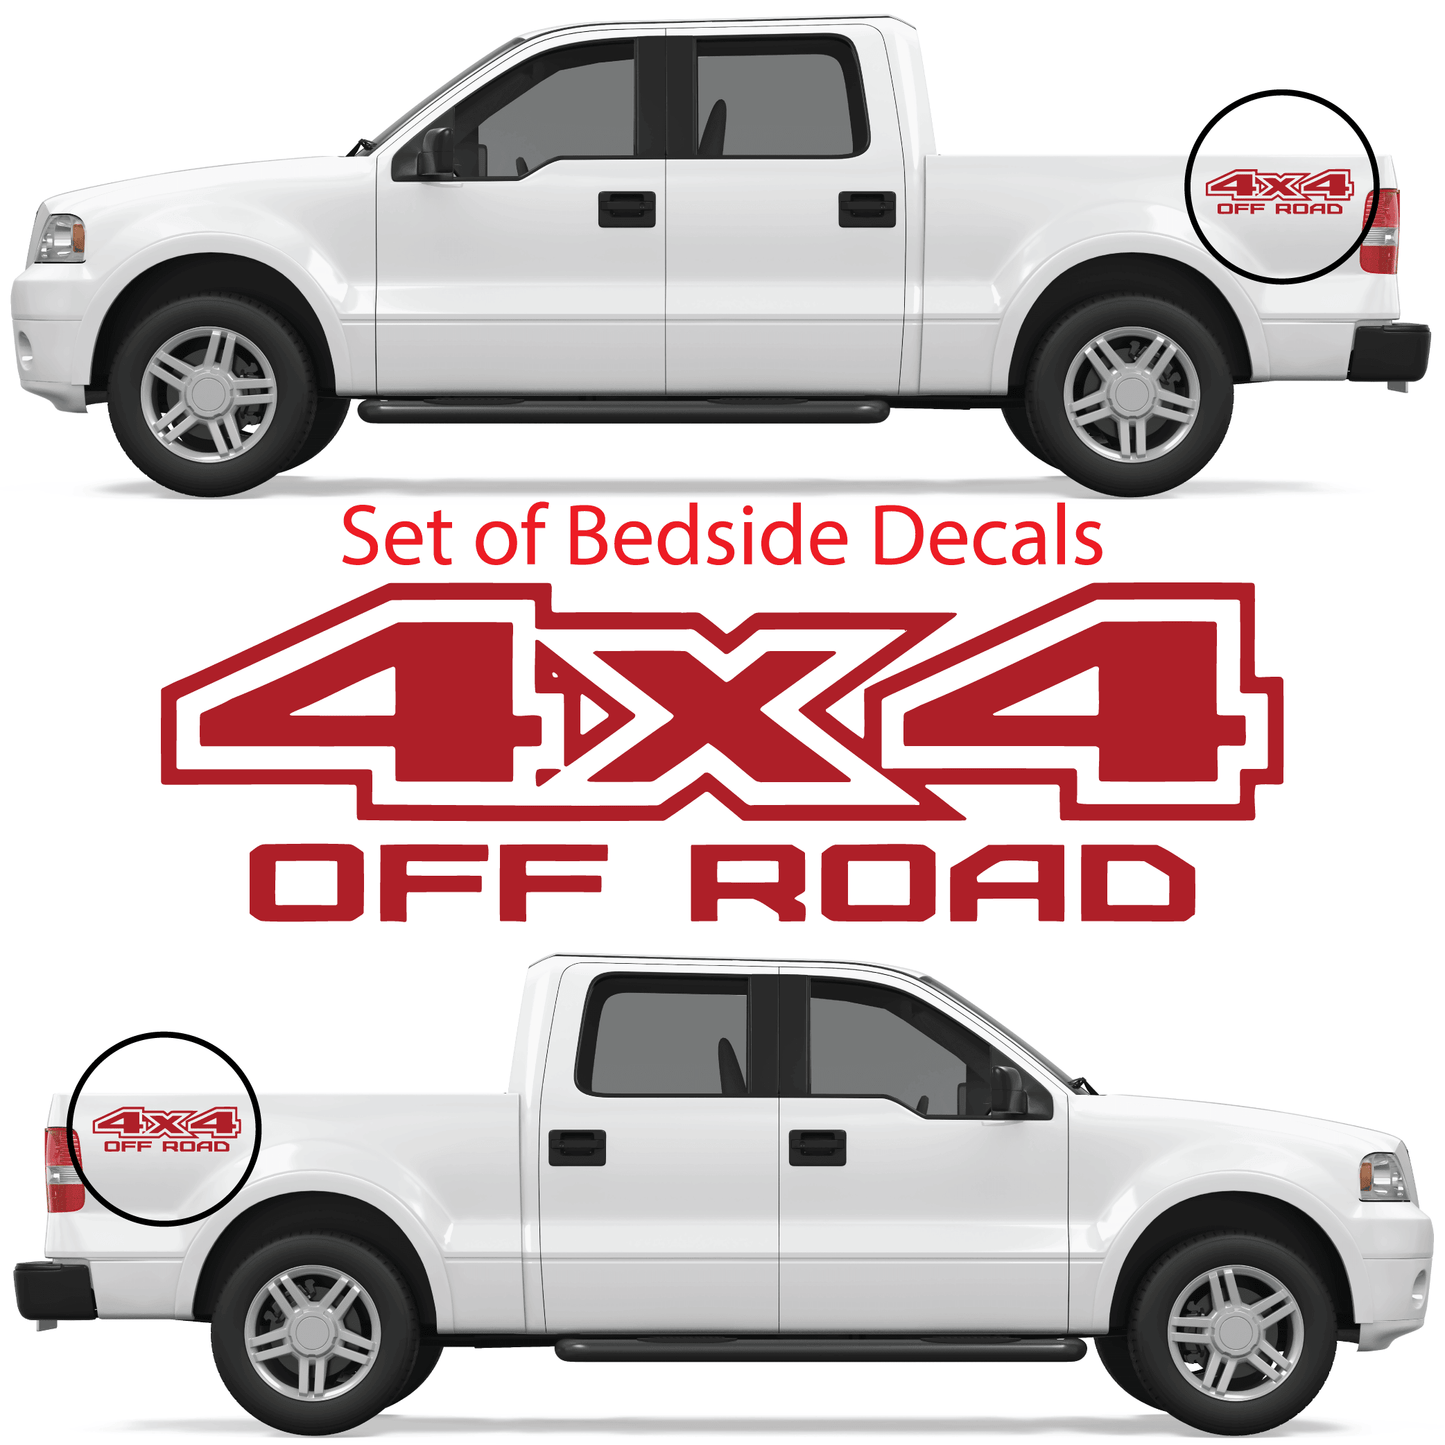 Shop Vinyl Design F-150 F-250 Trucks 4 x 4 Off Road Replacement Bedside Decals #05 Vehicle decal 001 Red Gloss Shop Vinyl Design decals stickers